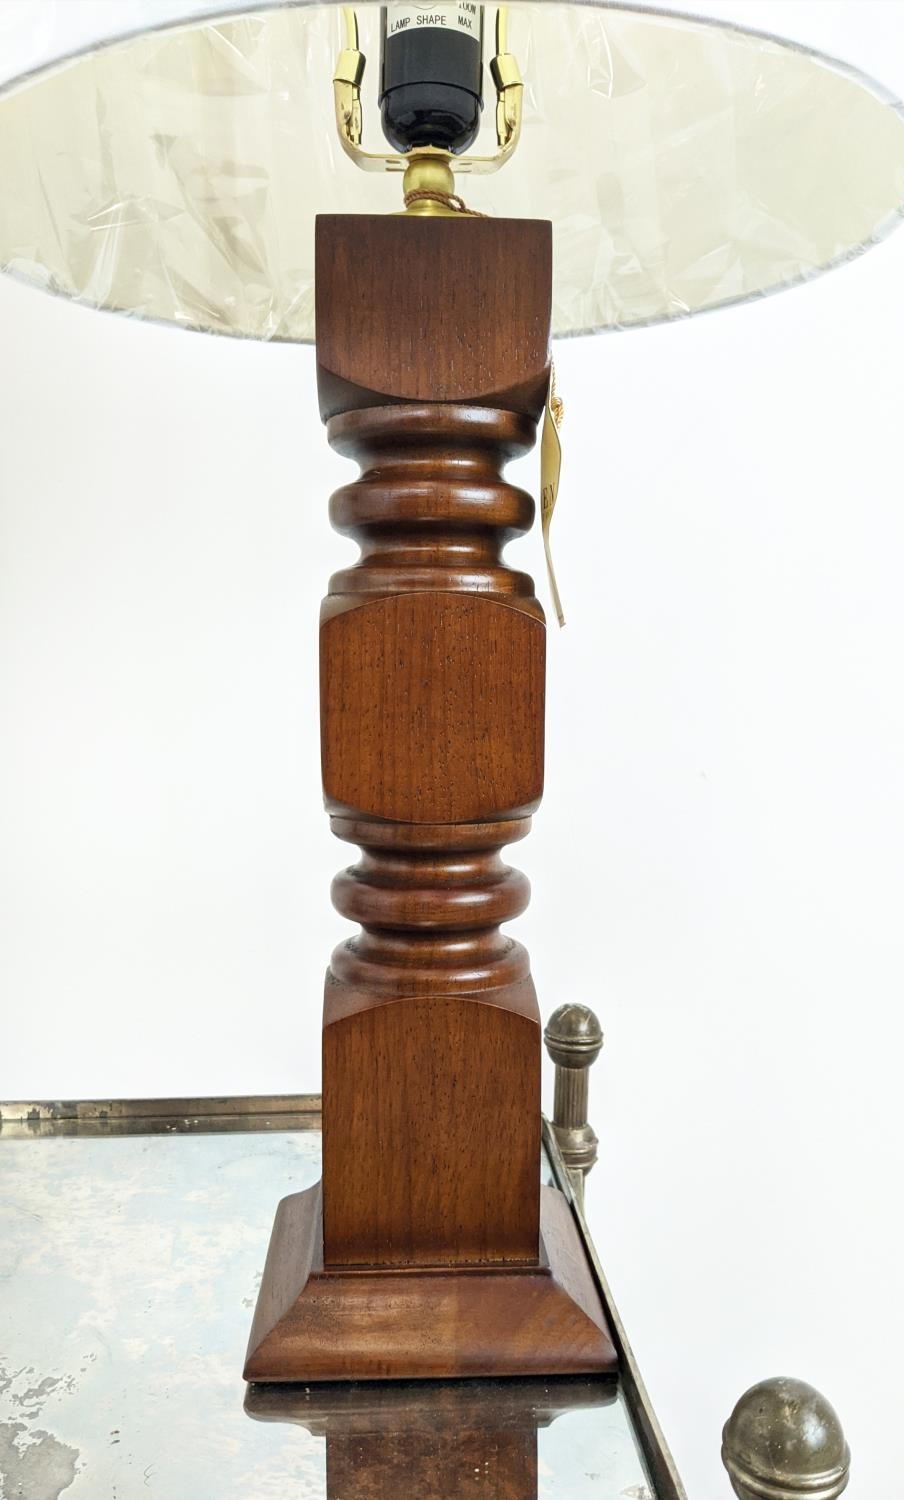 LAUREN RALPH LAUREN HOME TABLE LAMPS, a pair, carved wood, with shades, 68cm H approx. (2) - Image 3 of 5